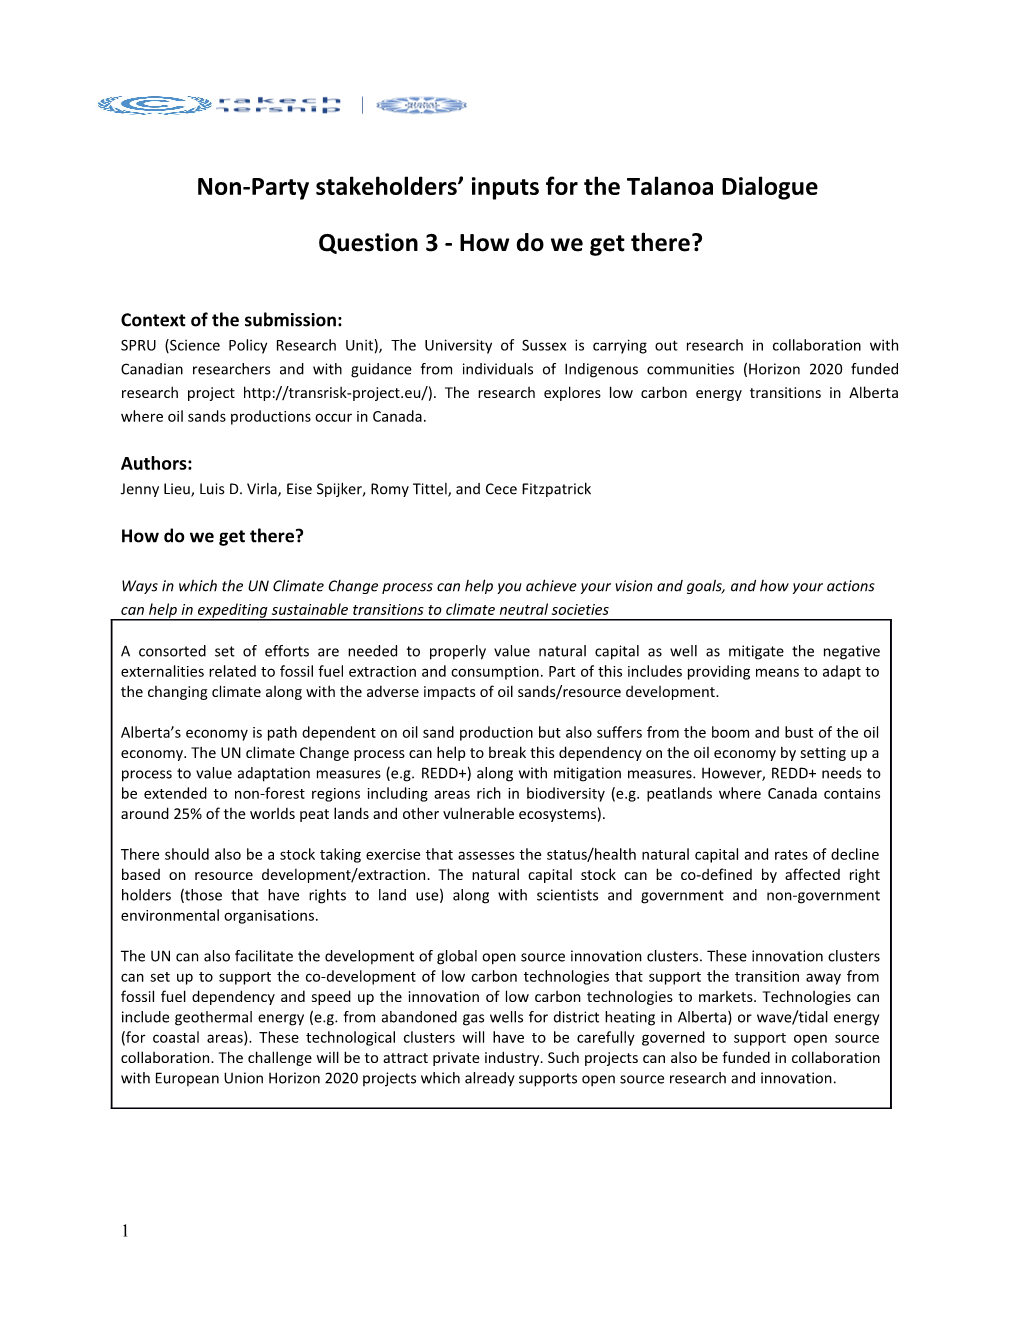 Non-Party Stakeholders Inputs for the Talanoa Dialogue